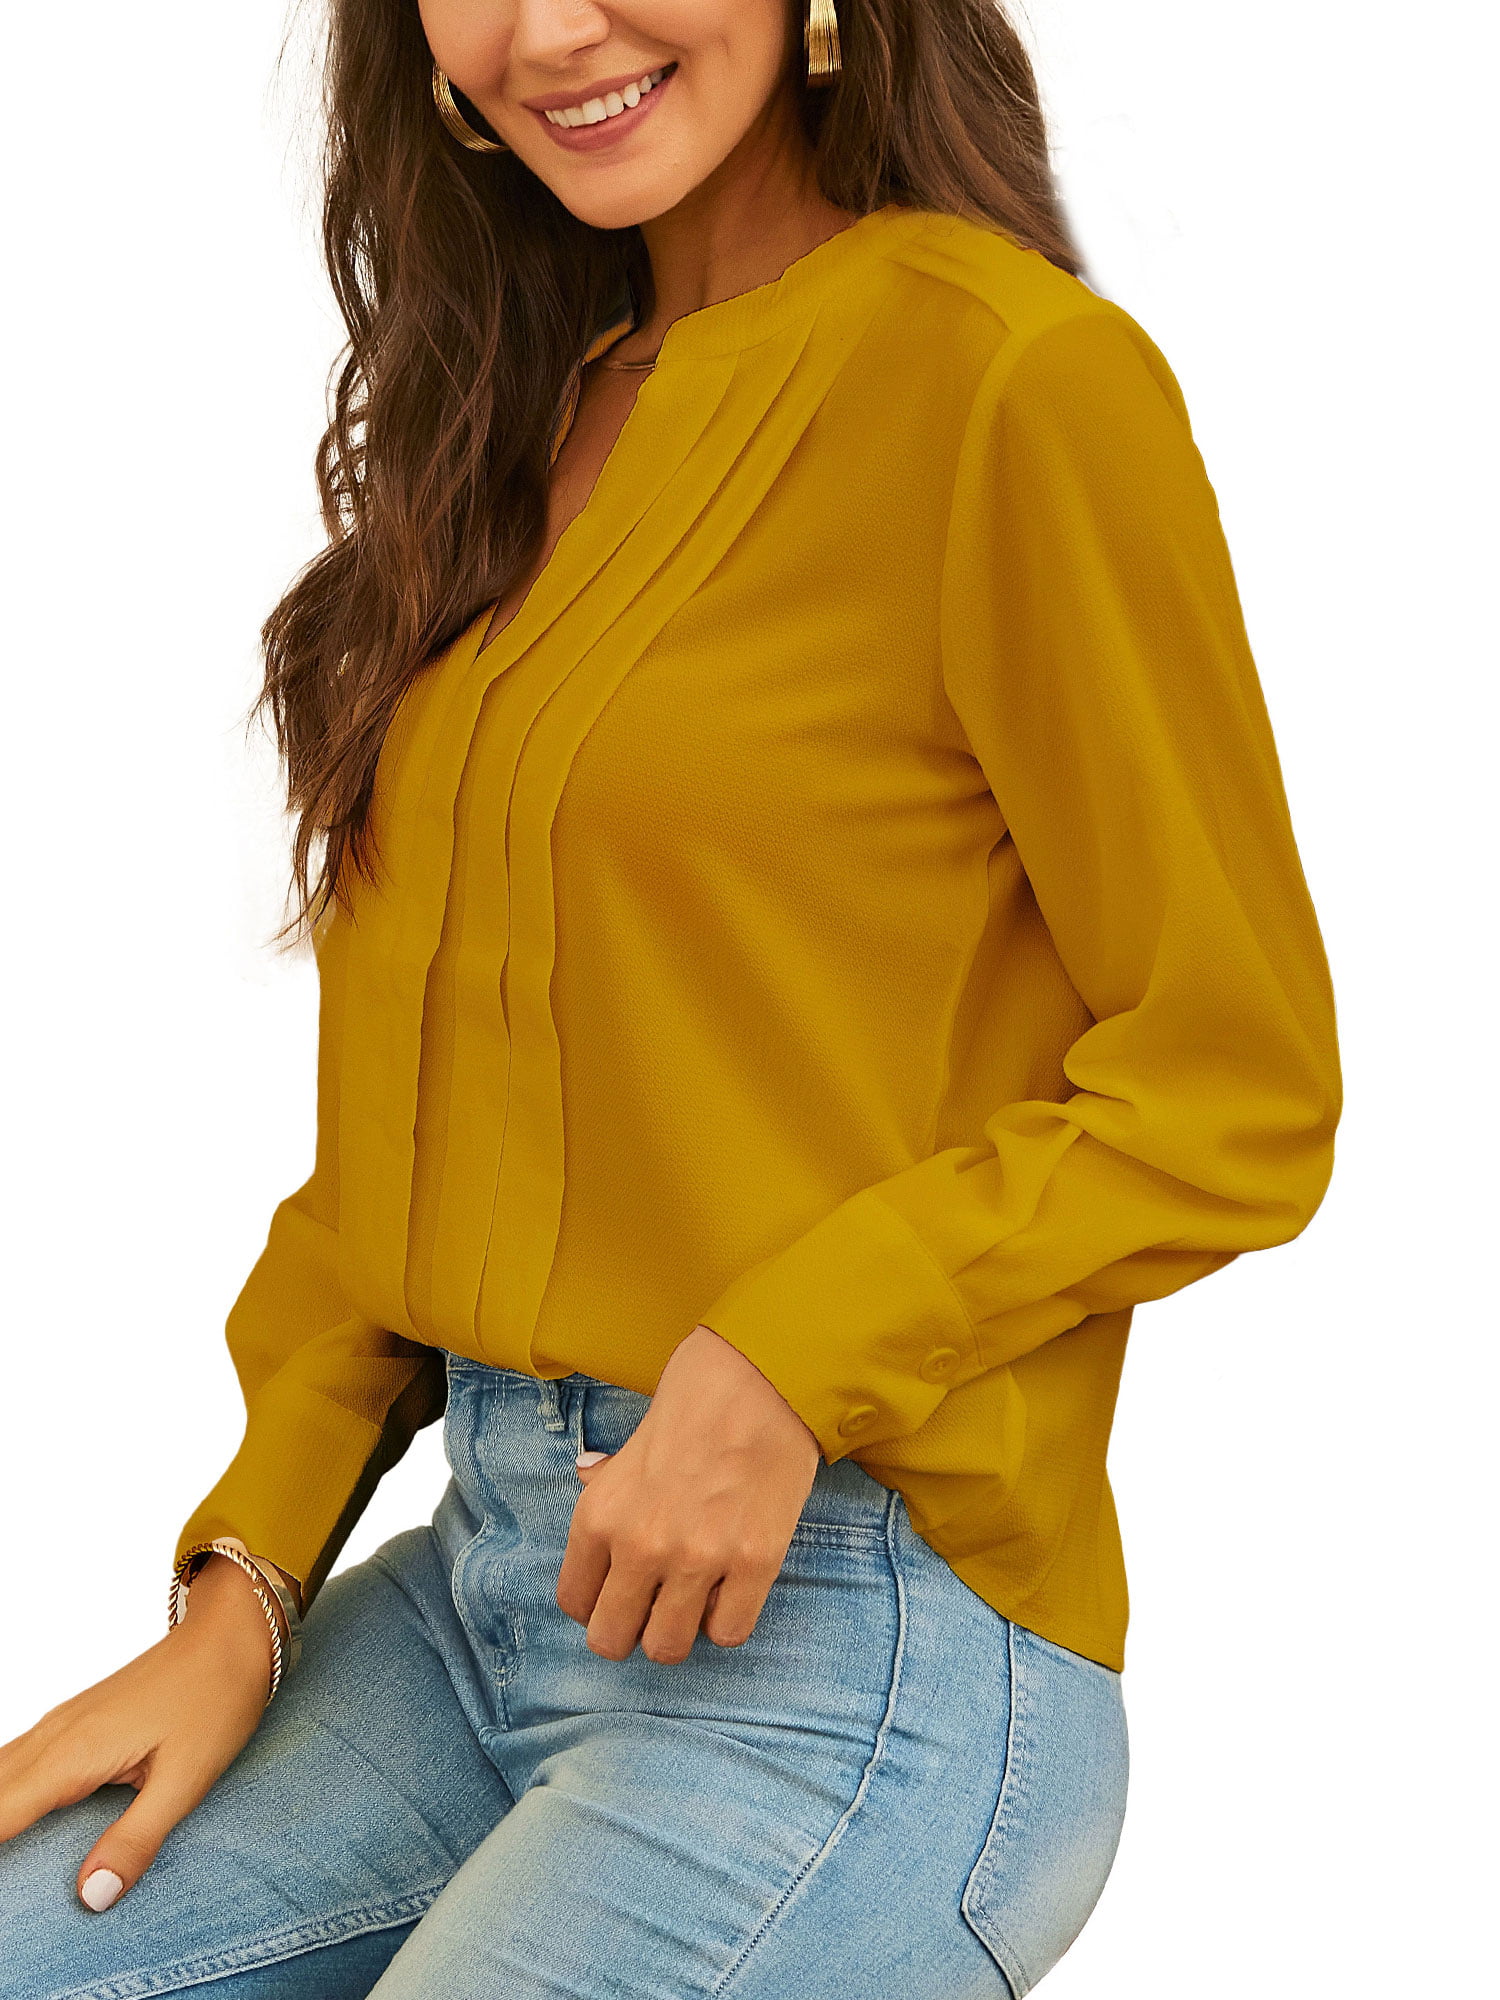 Niuer Women Leisure Loose Solid Color T Shirts Long Sleeve V Neck